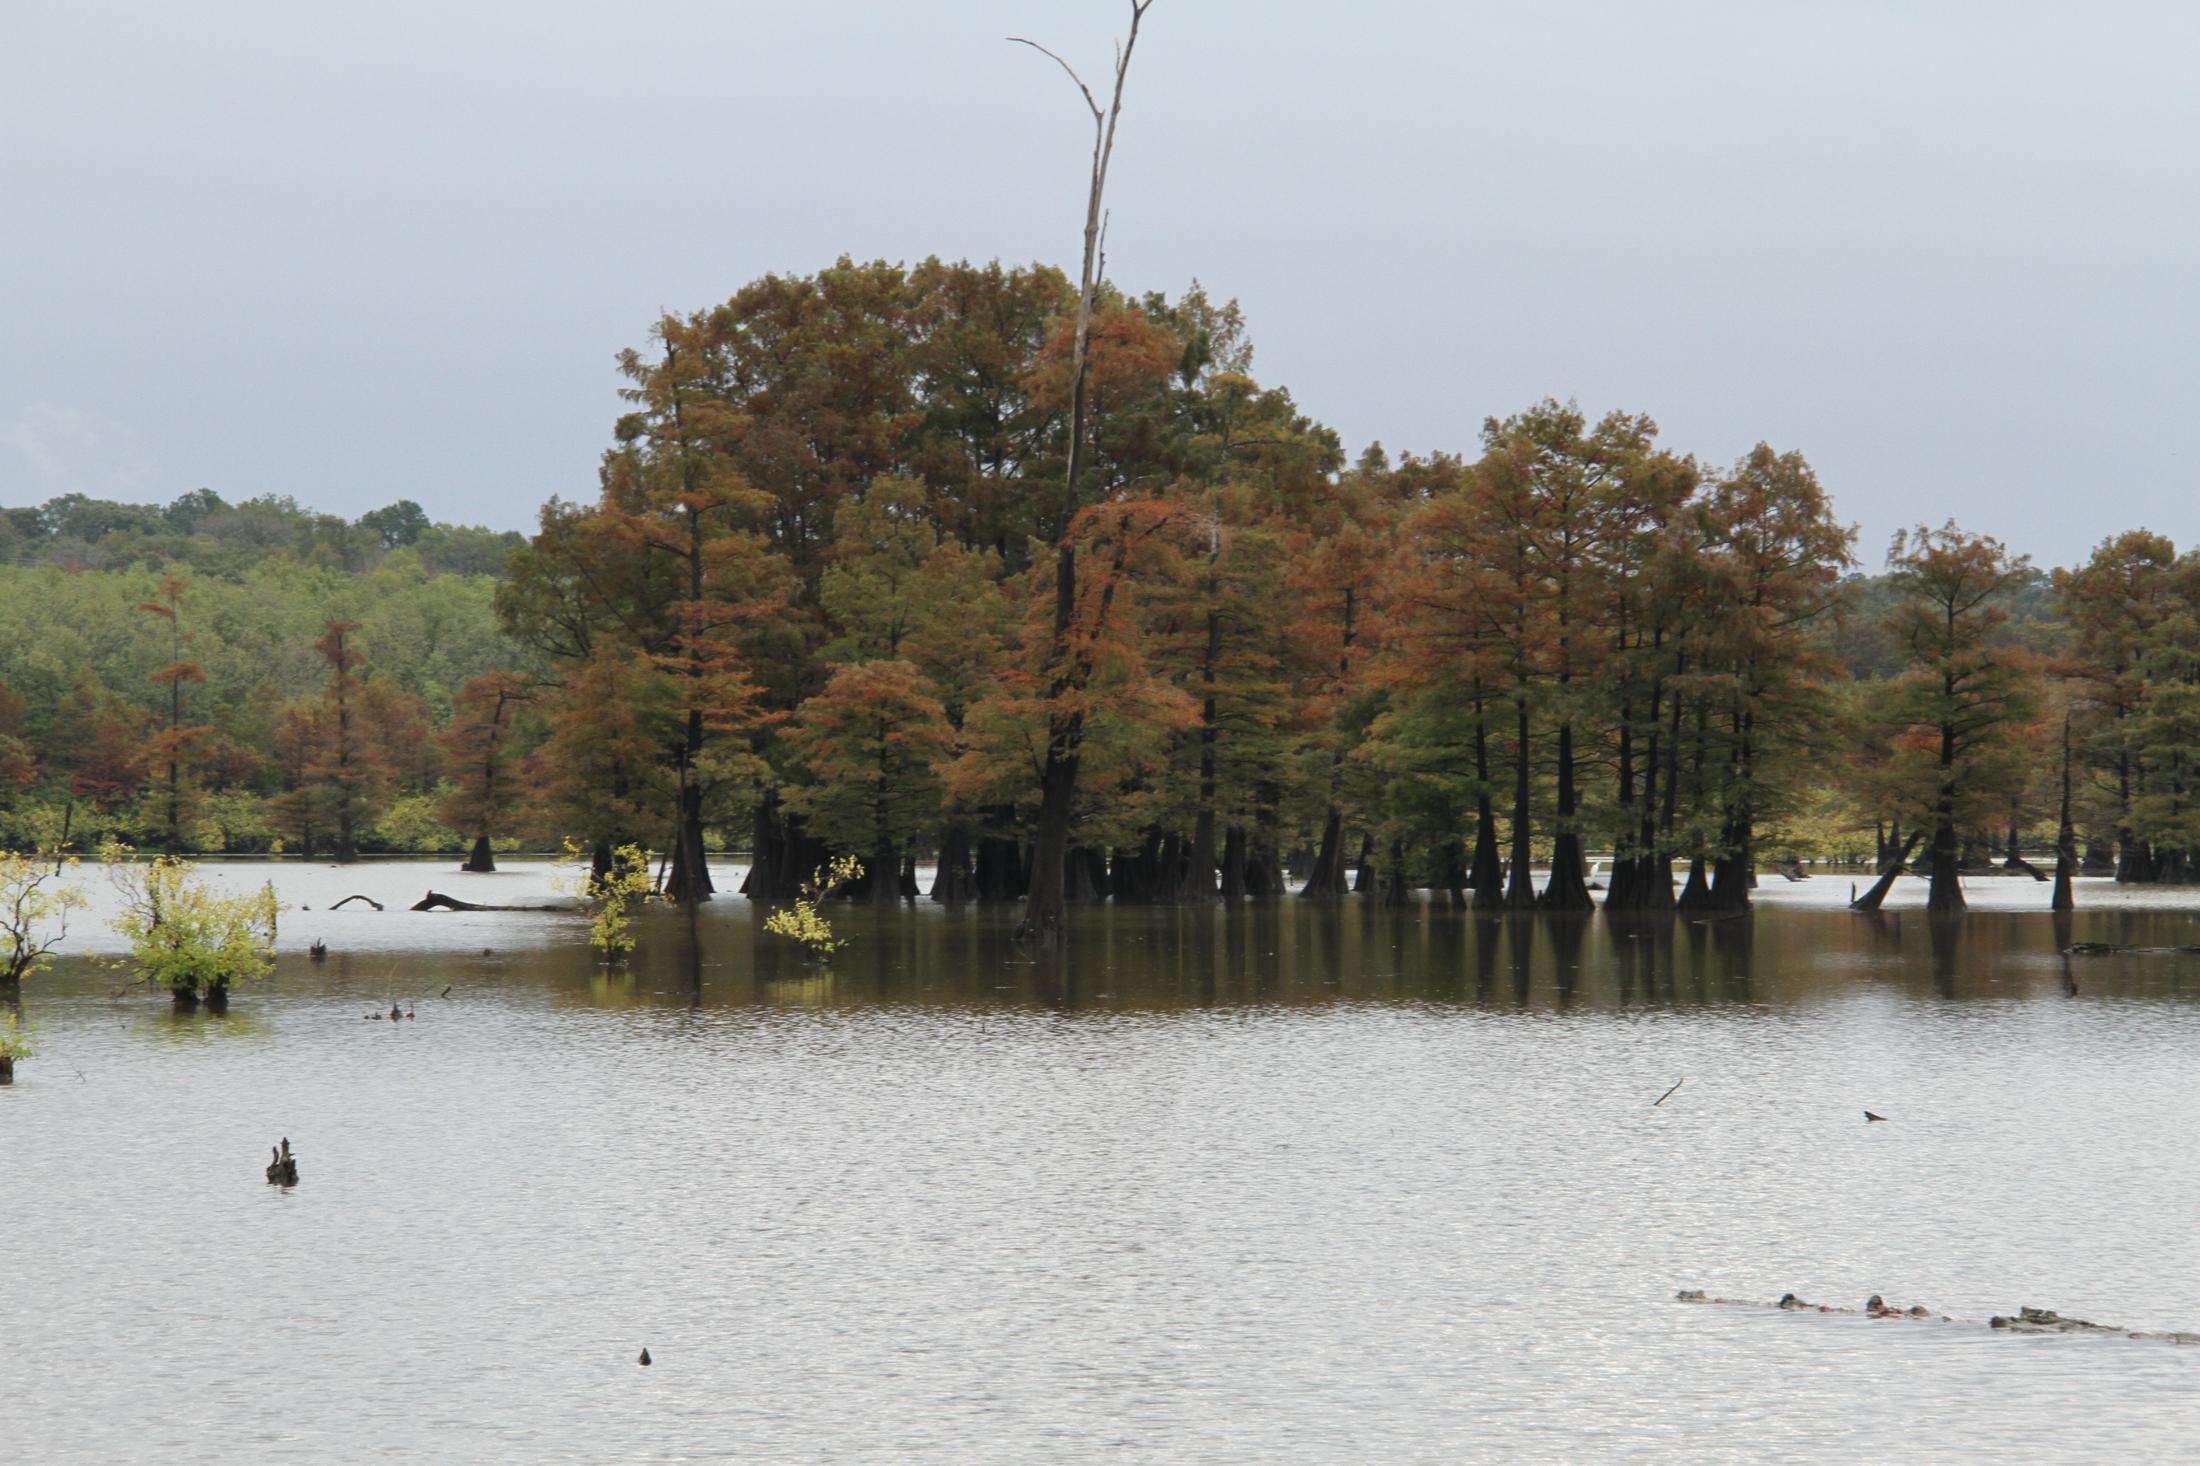 The cypress trees seem to play a role in the pattern each of the anglers are focusing on. Of course, this shouldn't be a surprise since the trees are literally eve-ry-where.